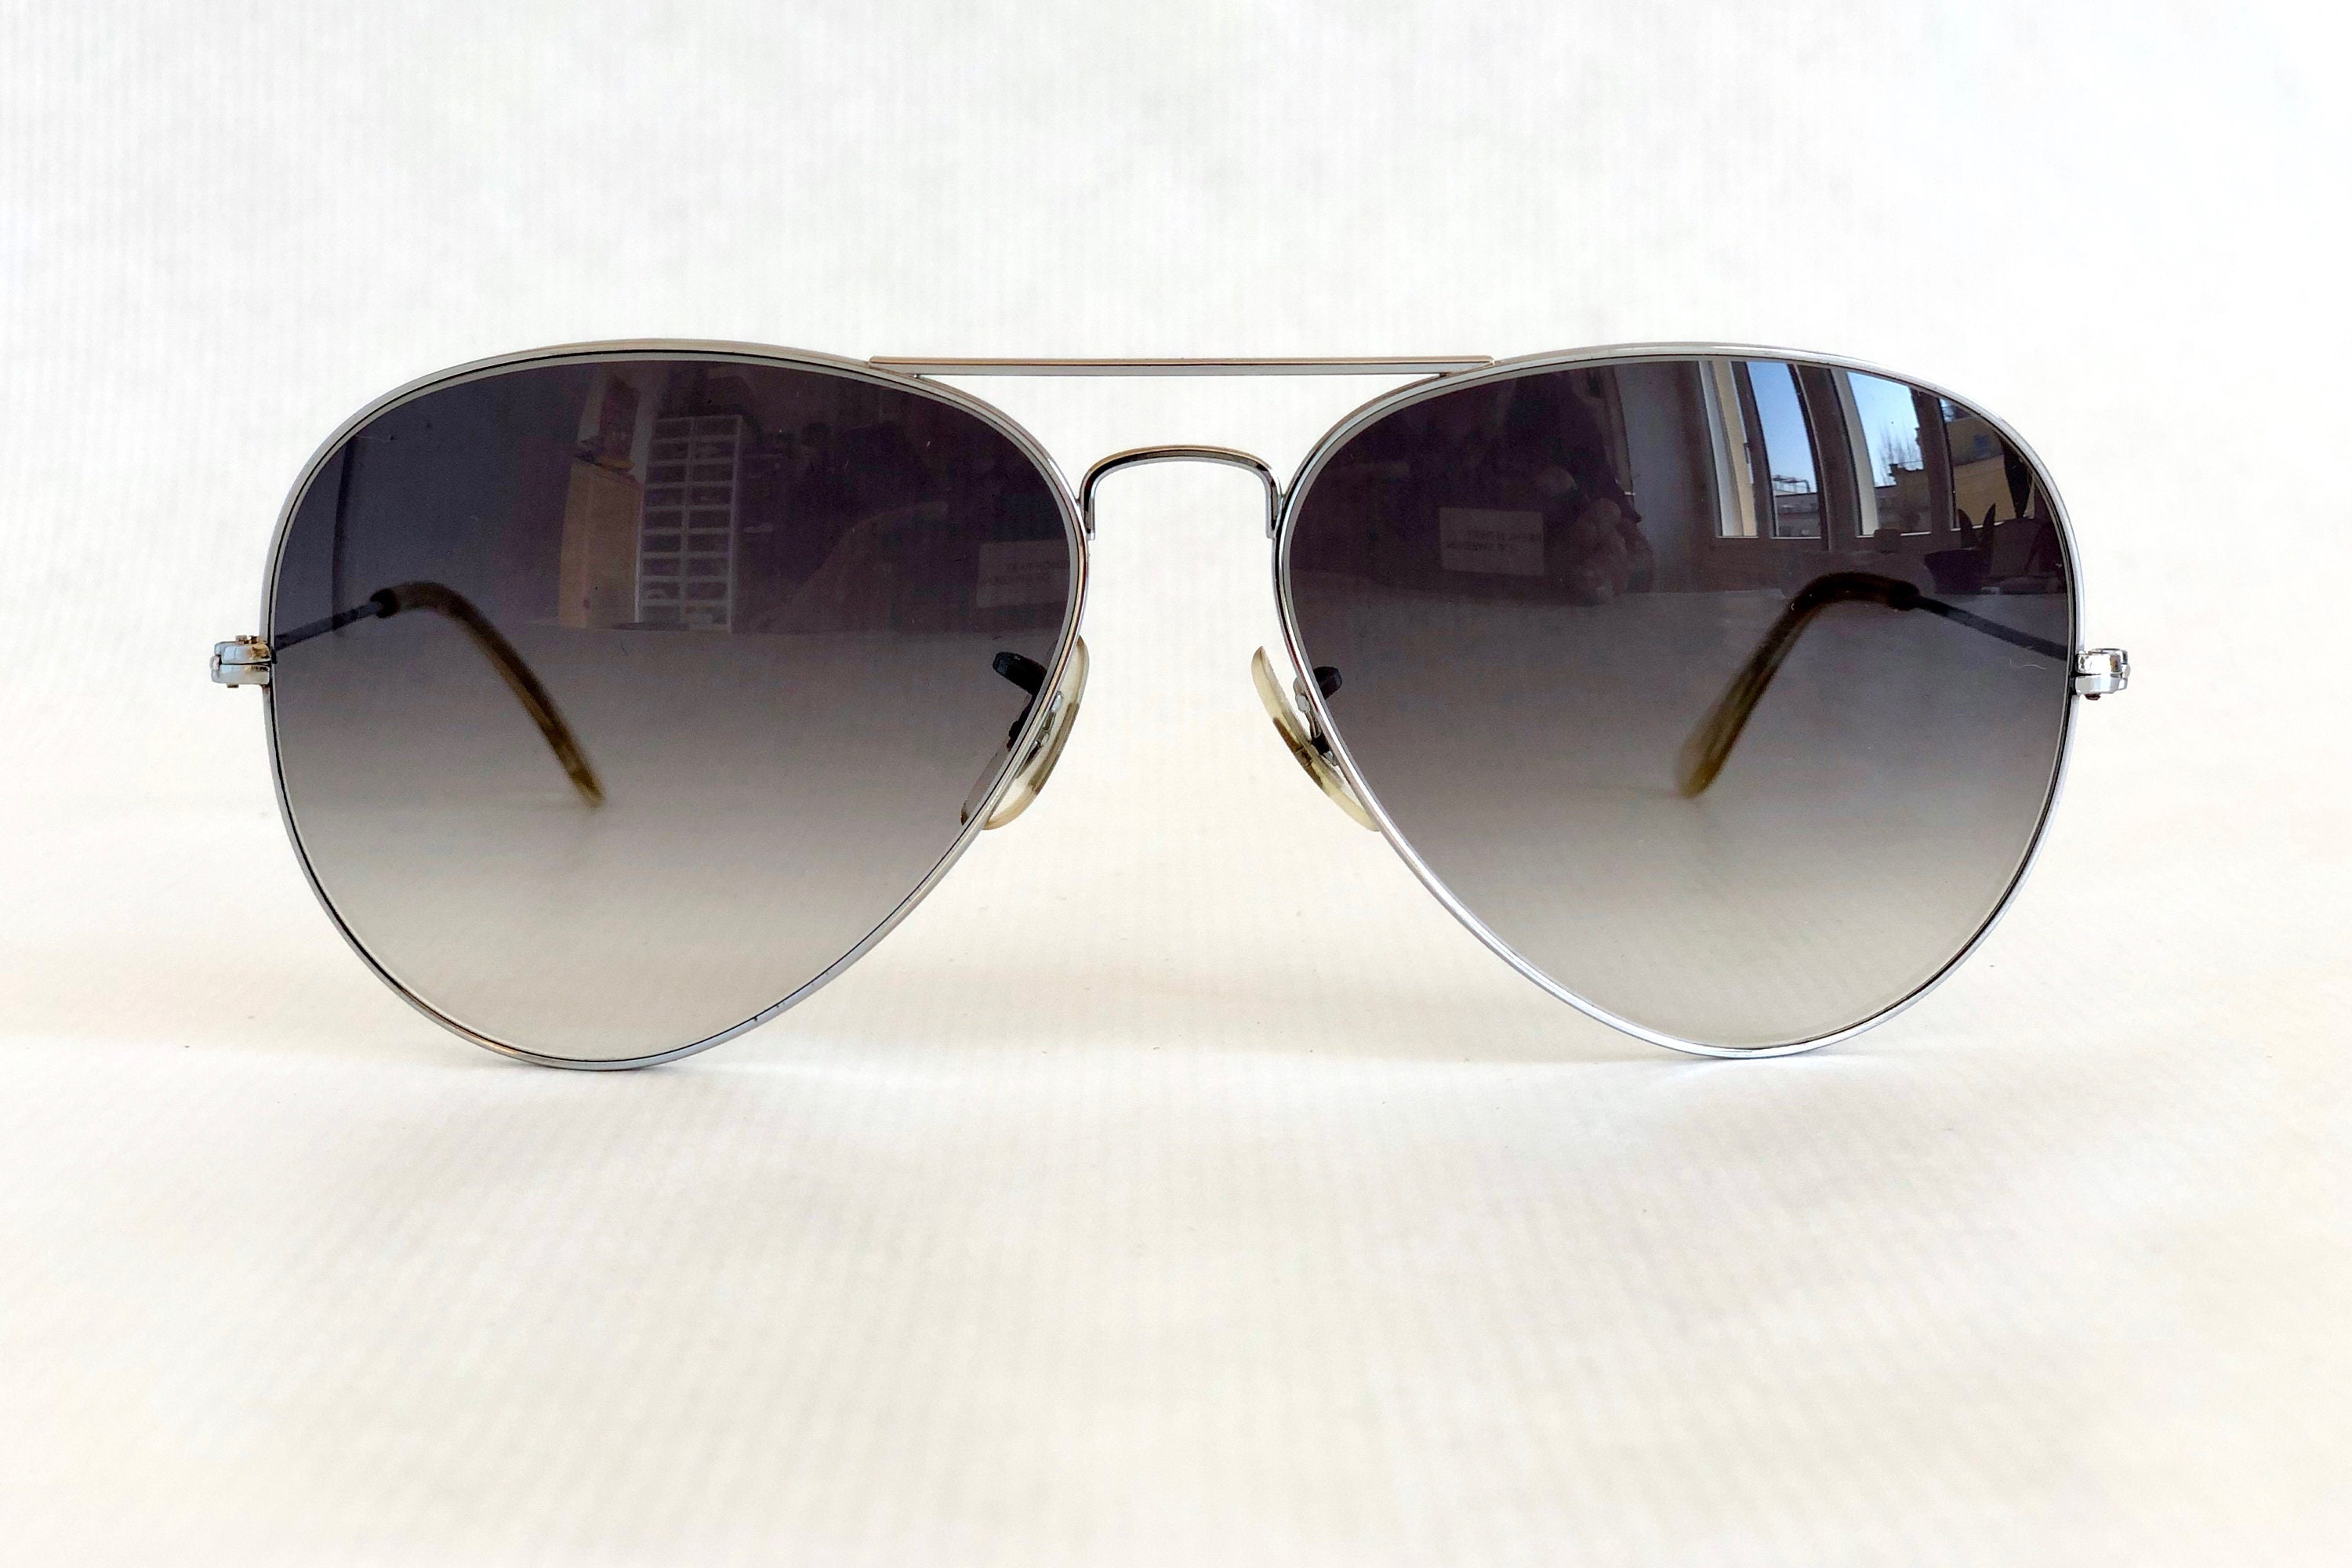 Ray-Ban by Bausch & Lomb Aviator Vintage Sunglasses – Including Case ...